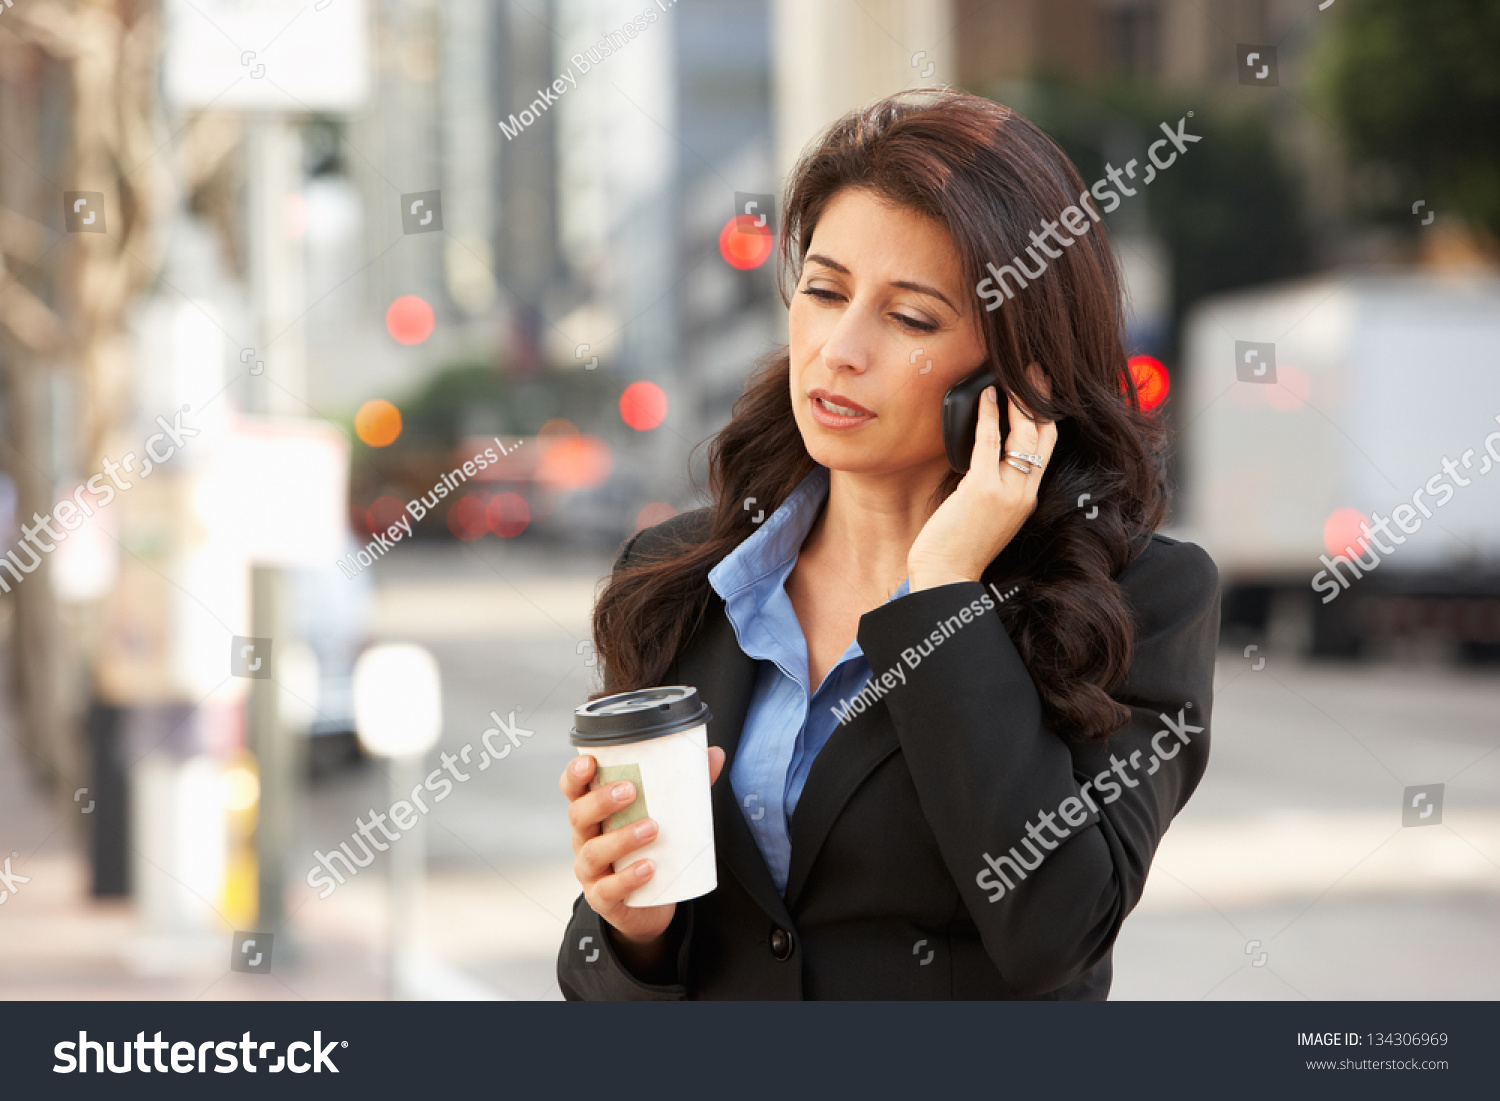 Businesswoman Outside Office On Mobile Phone #134306969